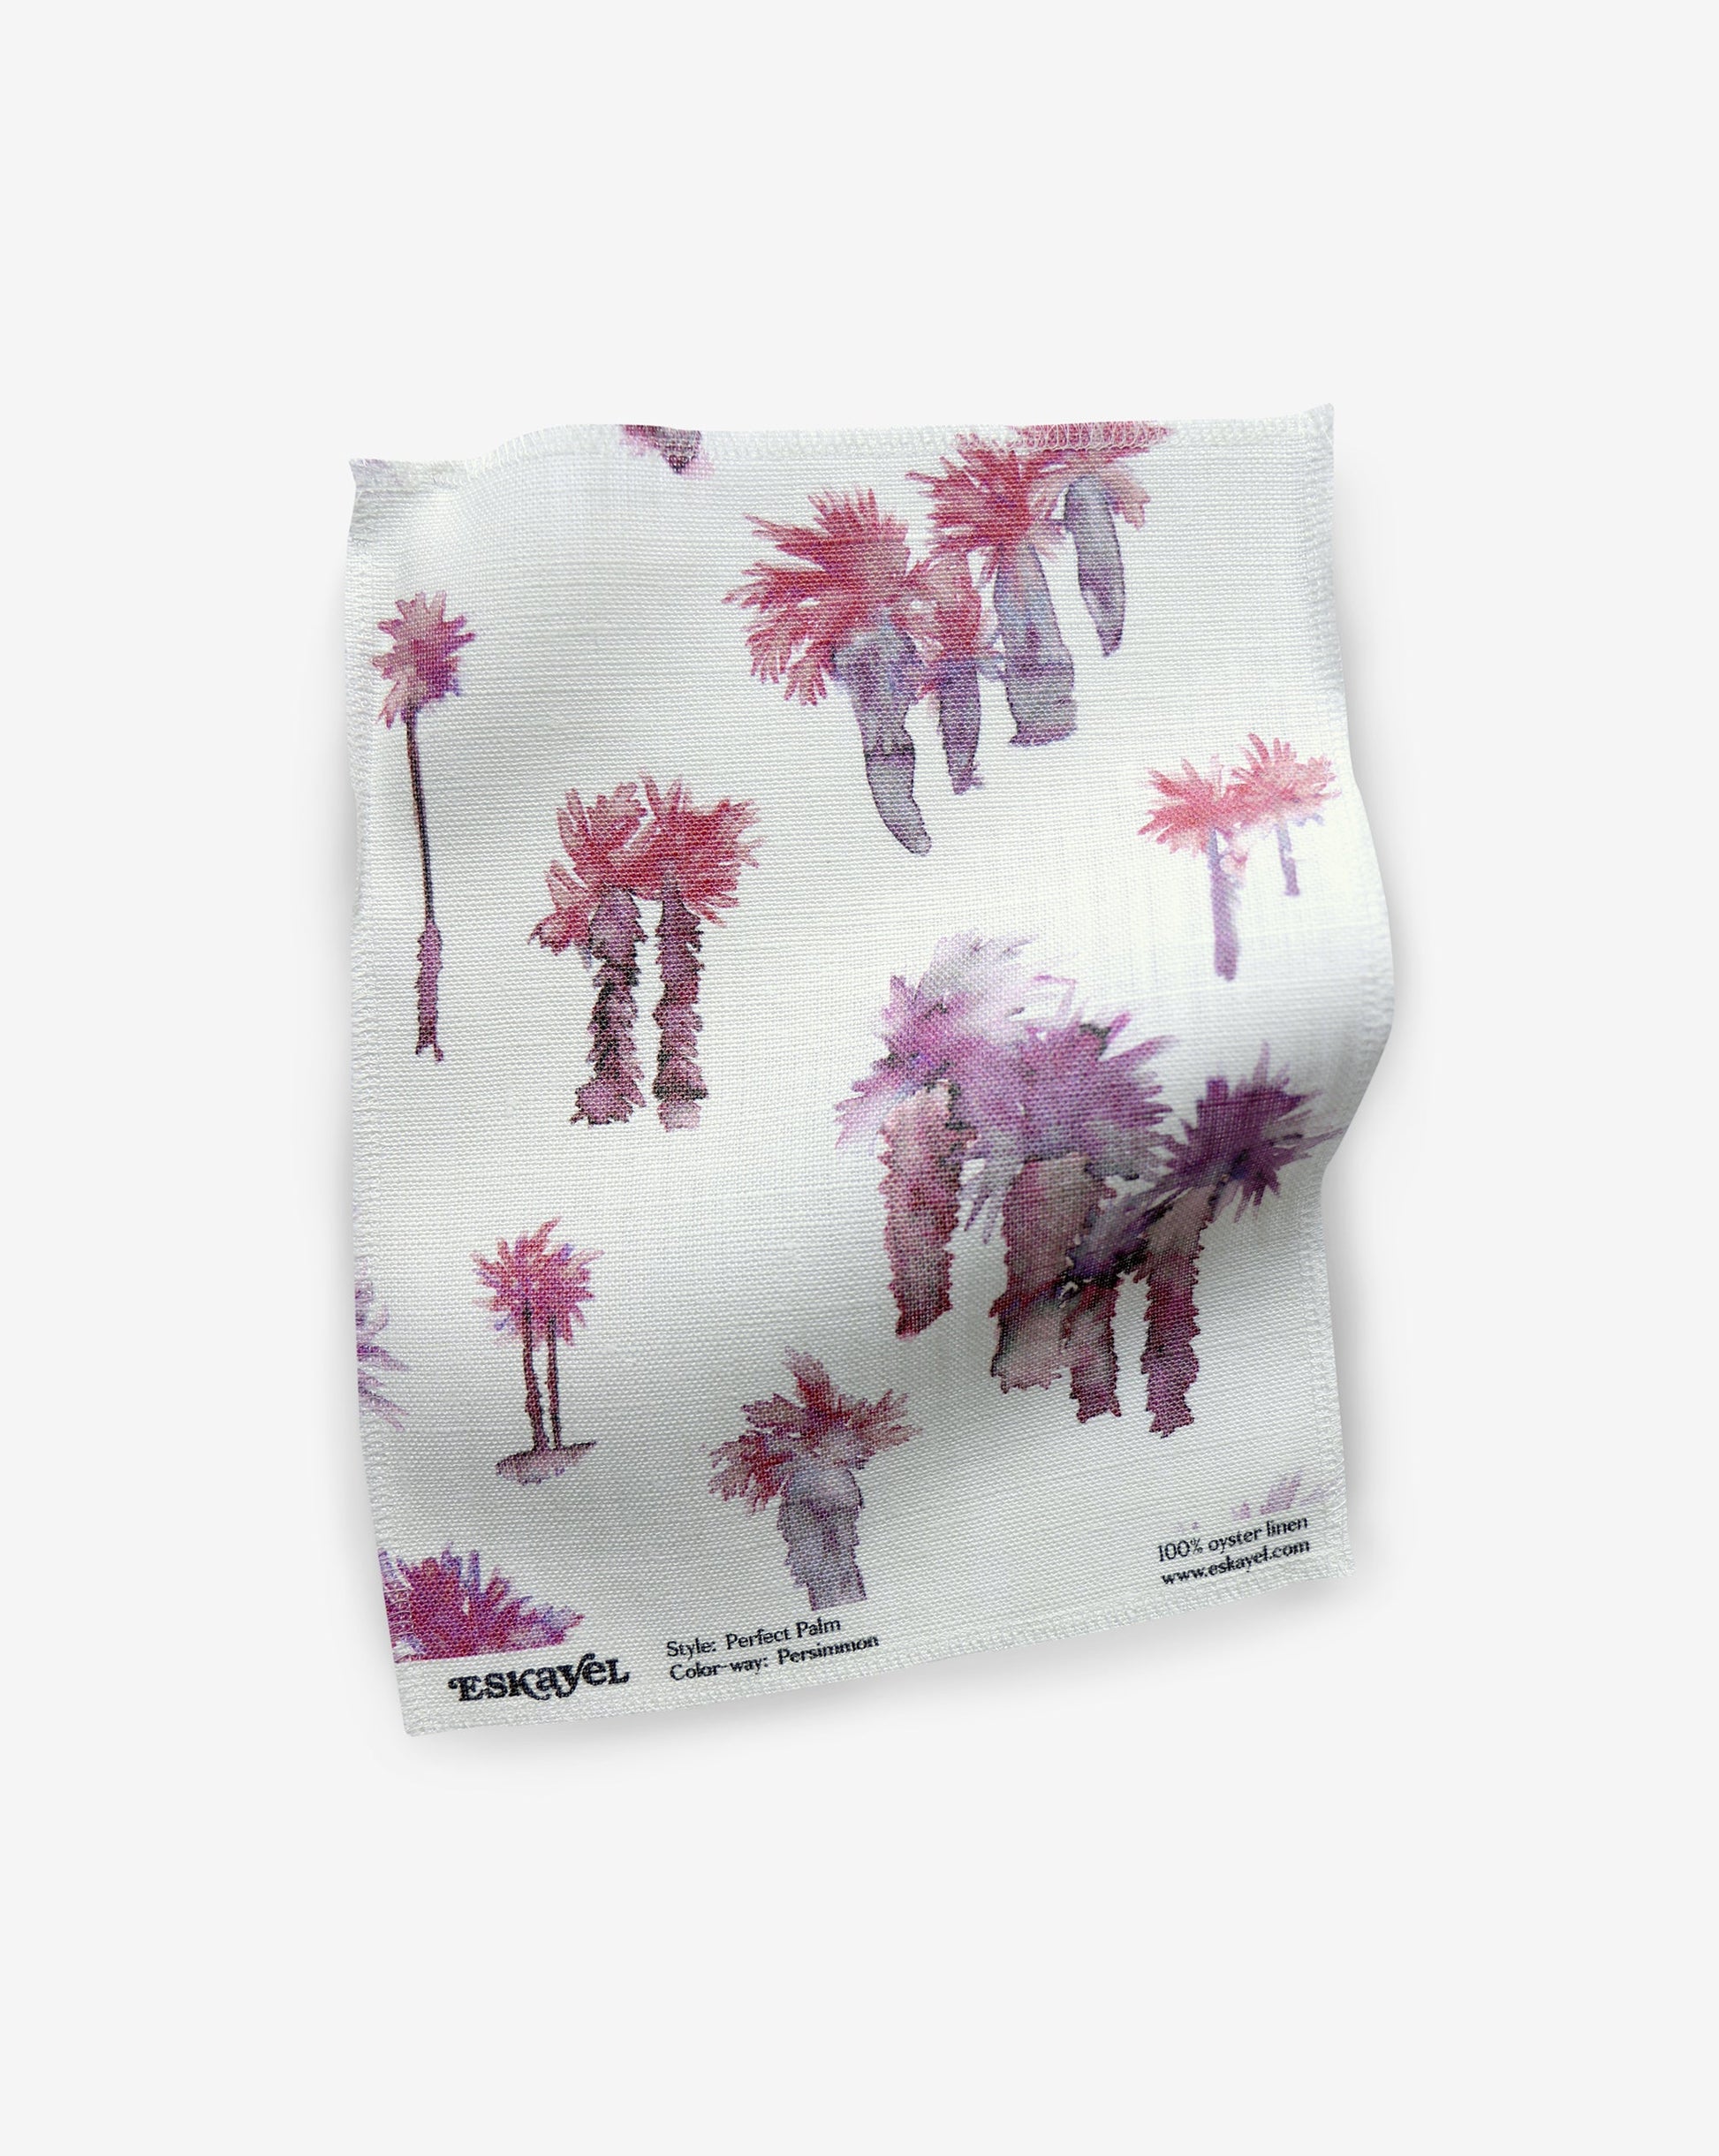 A pink and purple Perfect Palm Fabric Persimmon with palm trees on it